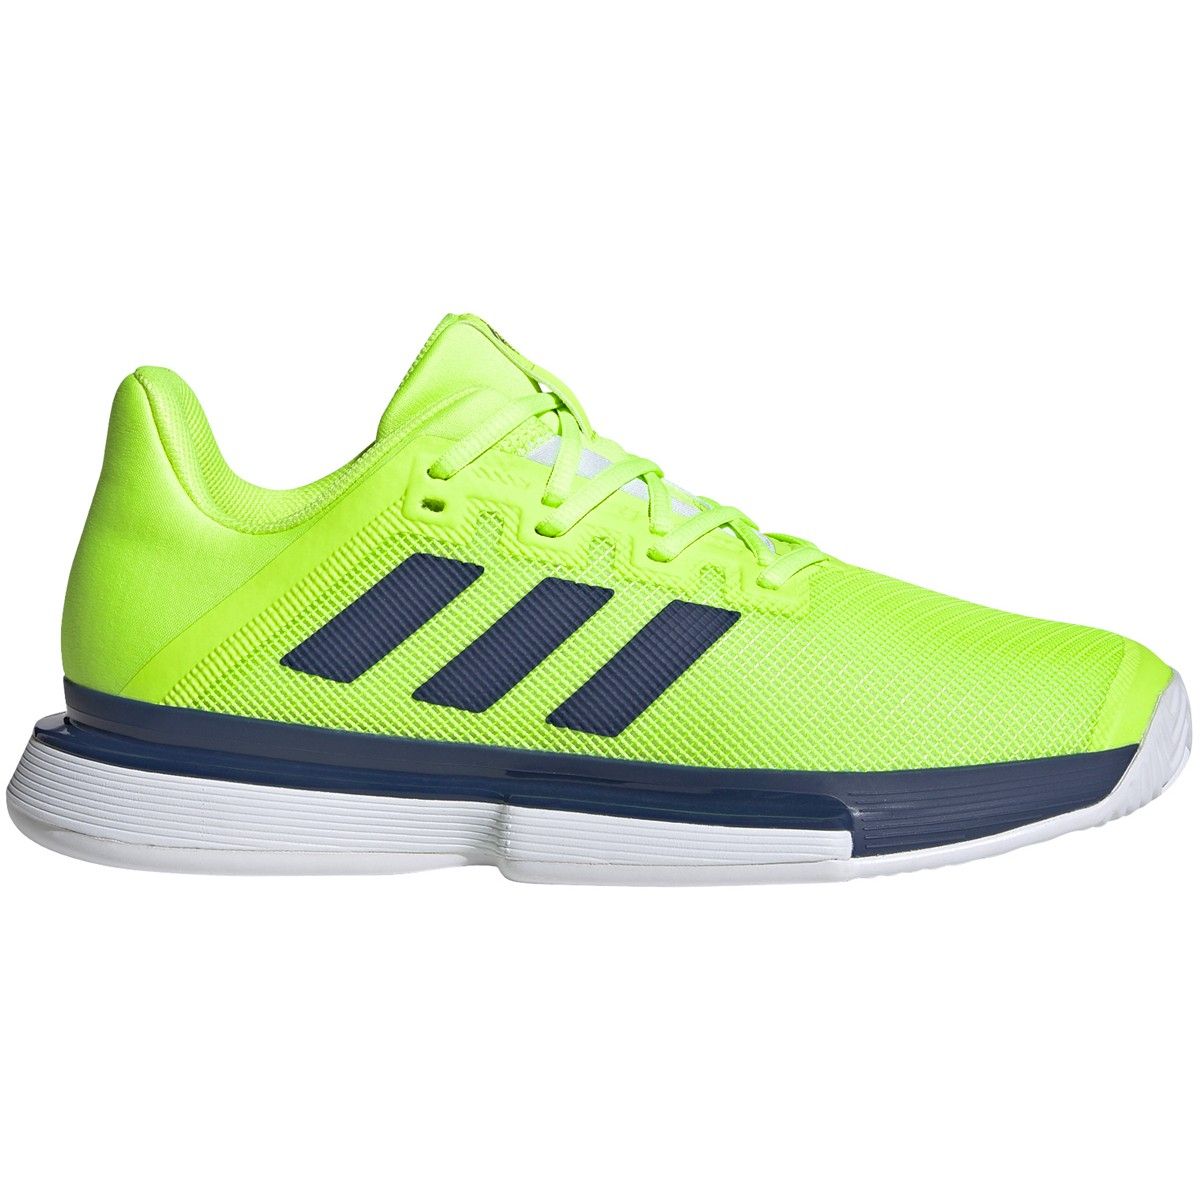 adidas SoleMatch Bounce Men's All Court Tennis Shoes FU8119